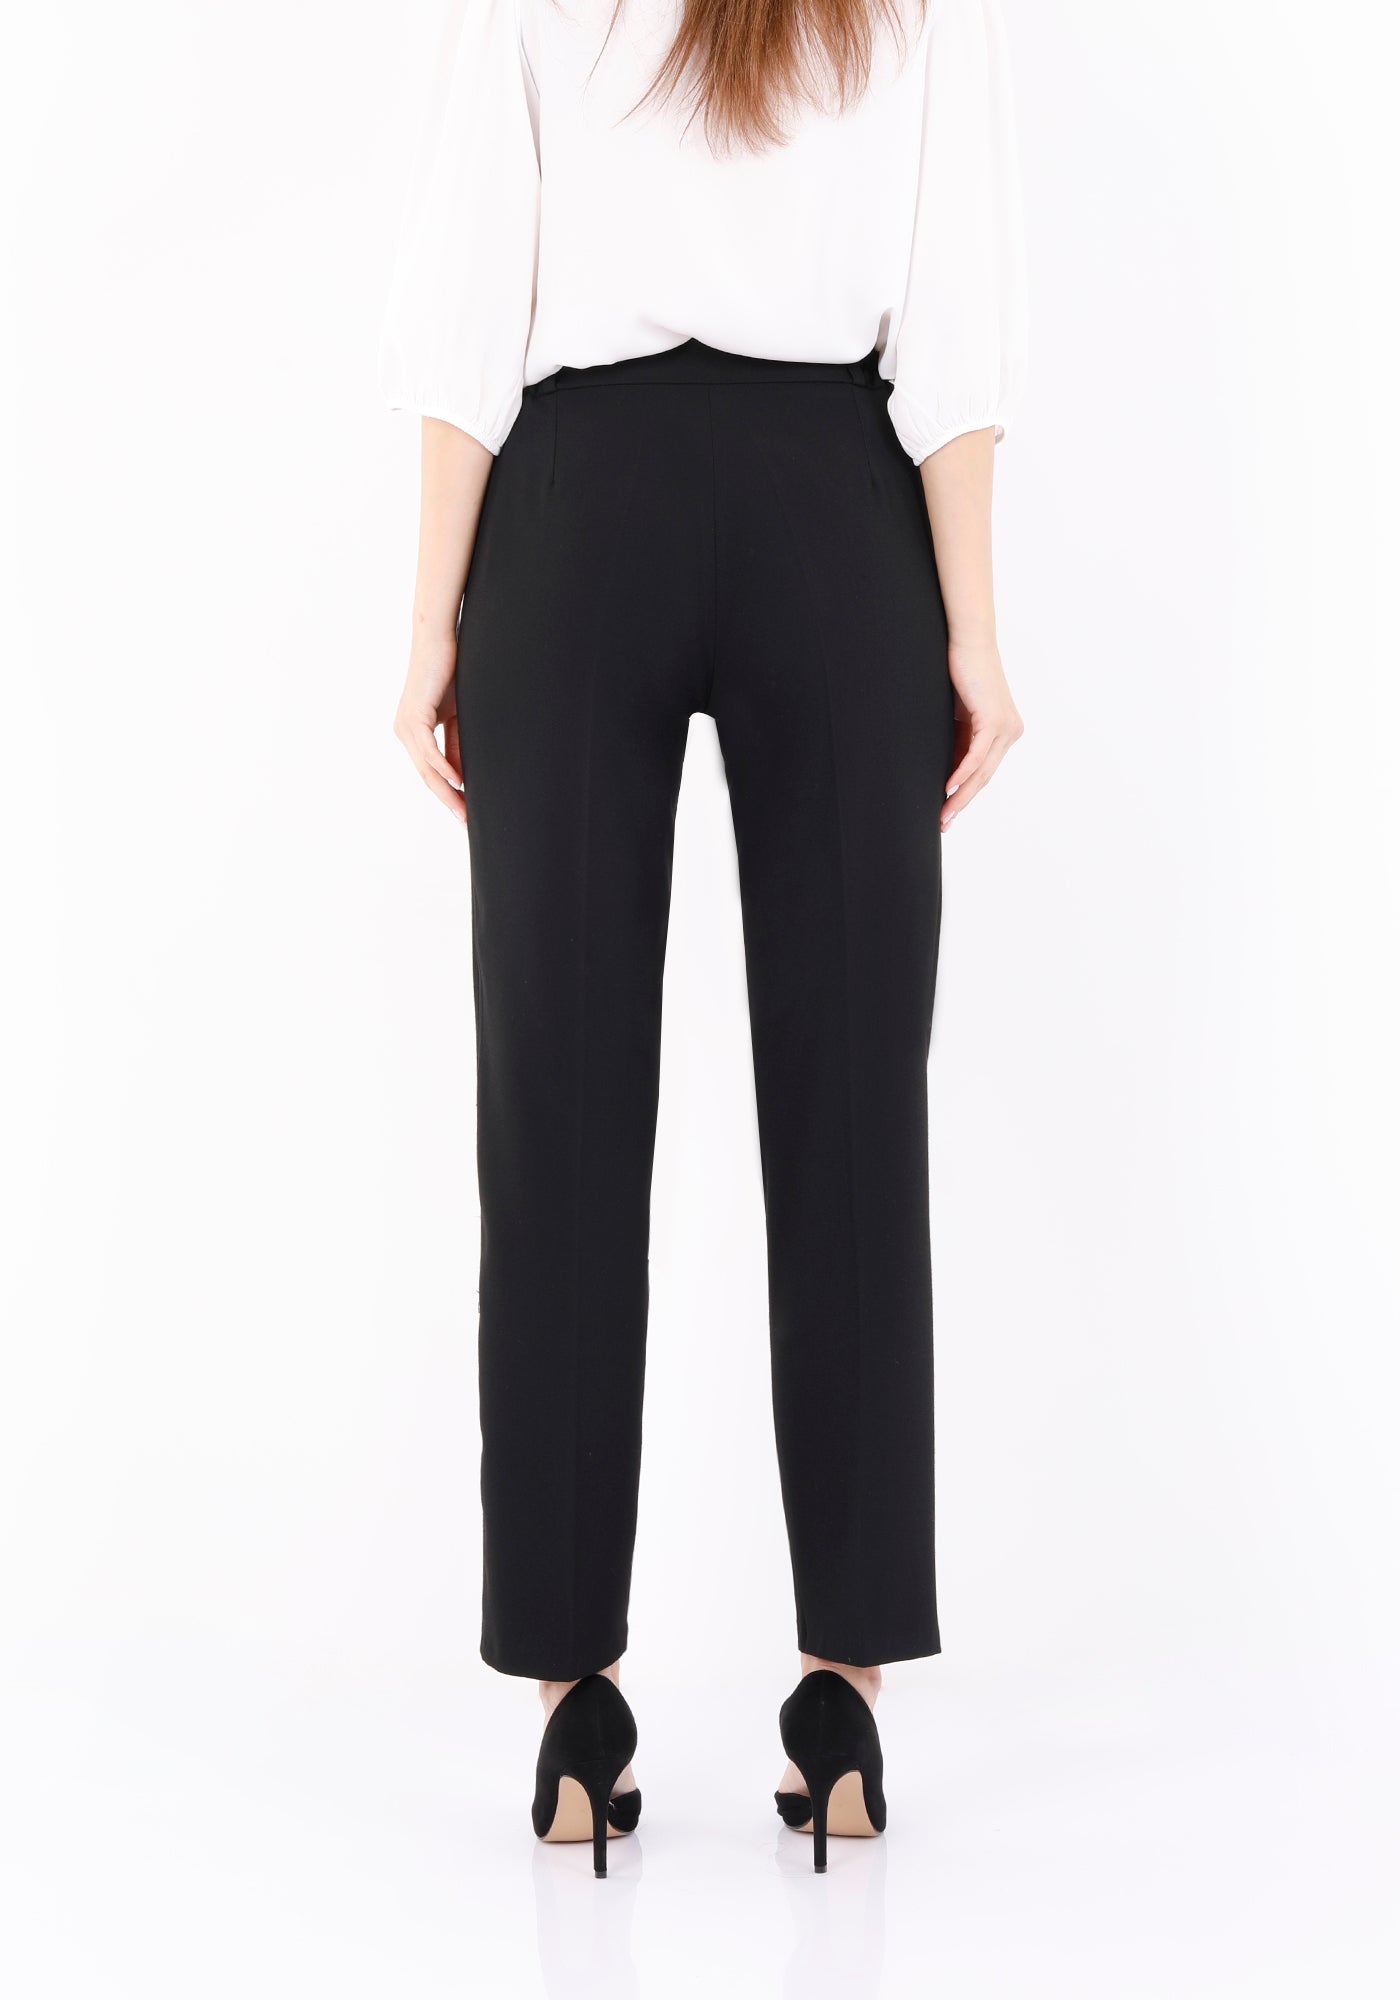 Straight Black Pants for Women with Elastic Waistband and Zipper Combined G-Line